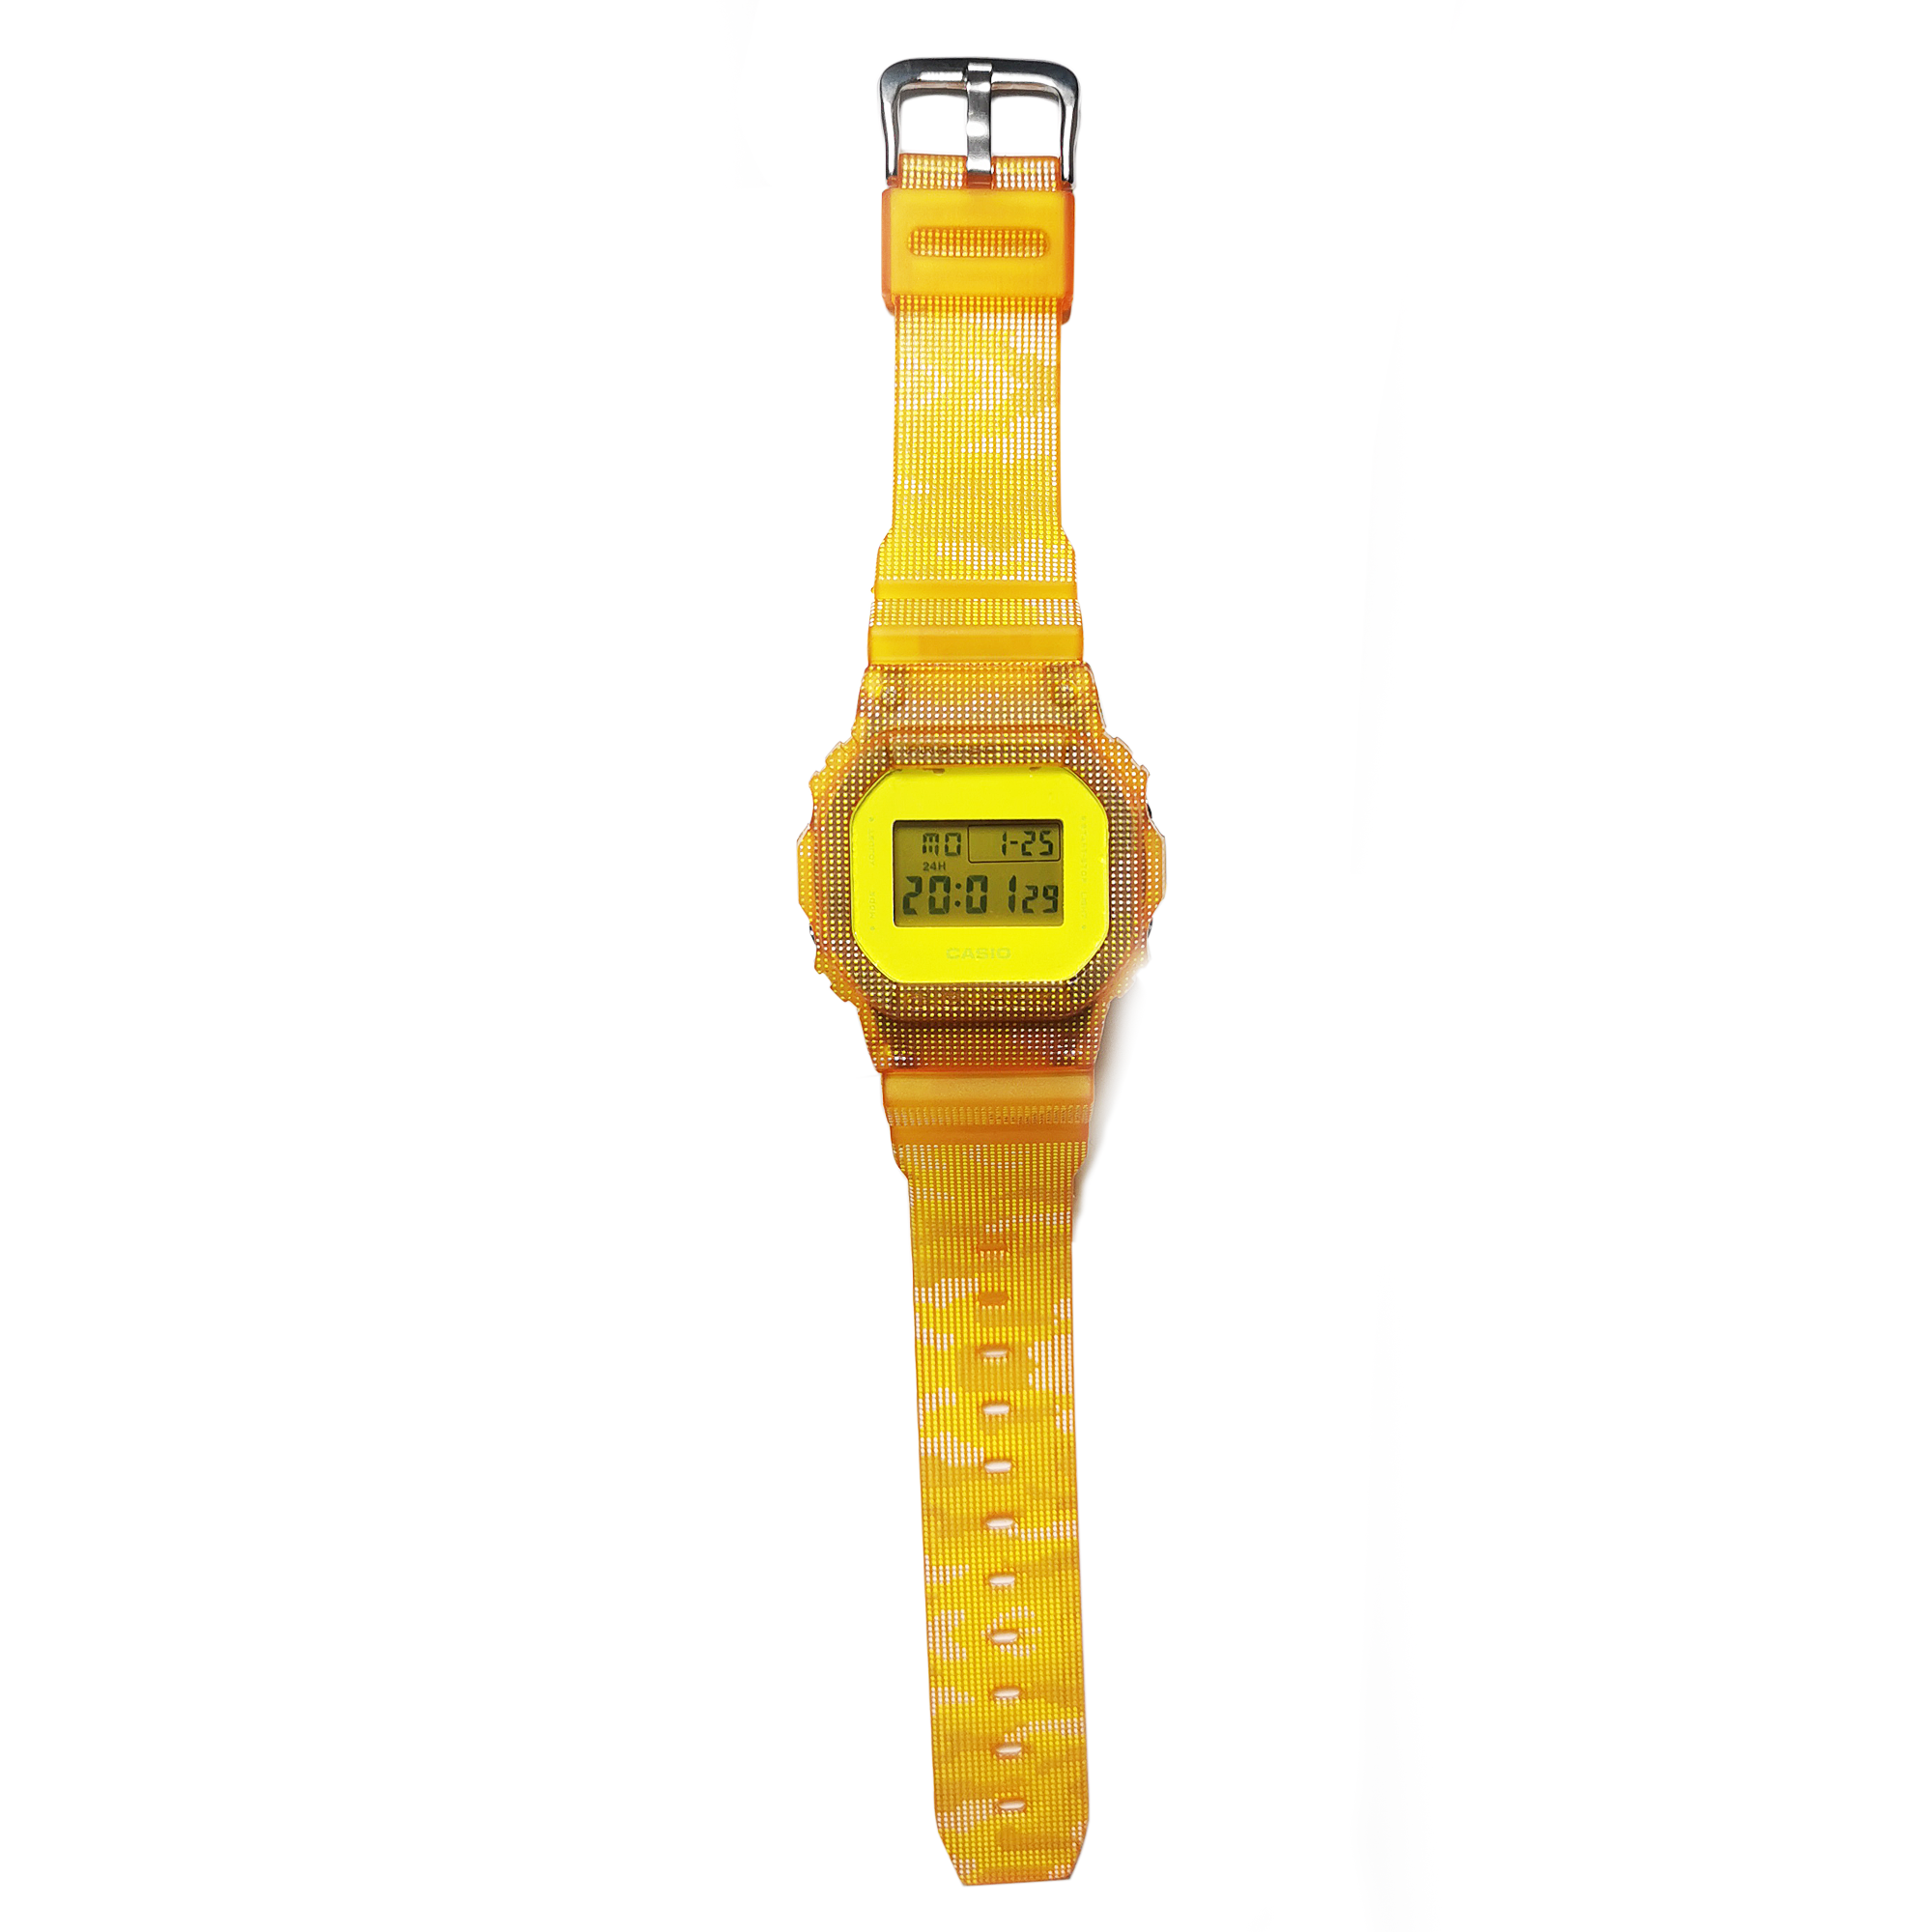 DW5600 LASER DOTTED CAMO YELLOW - 1.png